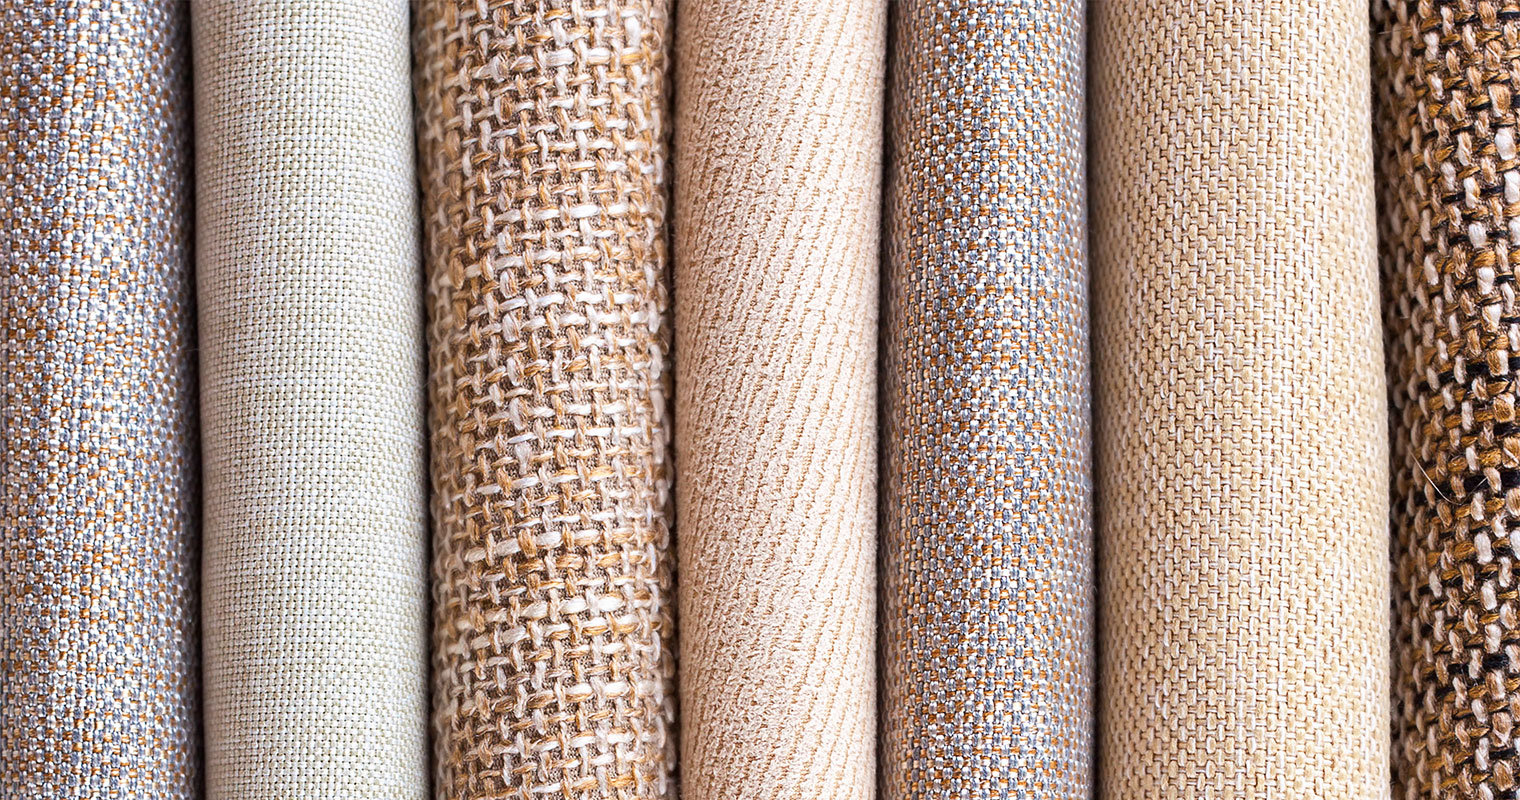 differnt textures of natural fabric